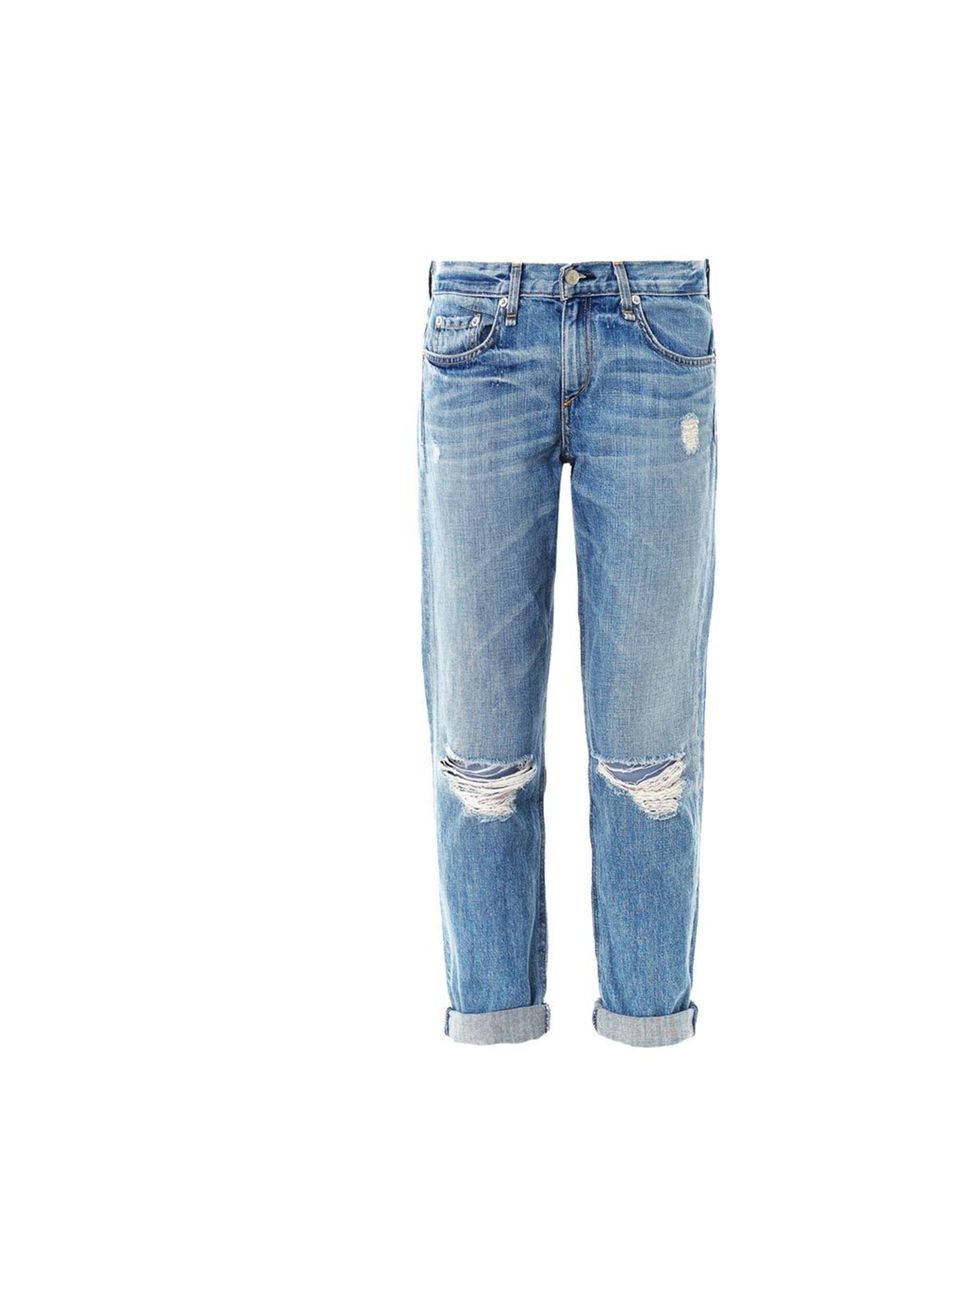 <p>Boyfriend vs Skinny, which side of the denim divide do you fall? Maybe these Rag &amp; Bone jeans will help you  decide, £215, at <a href="http://www.matchesfashion.com/product/160952">Matches Fashion</a></p>